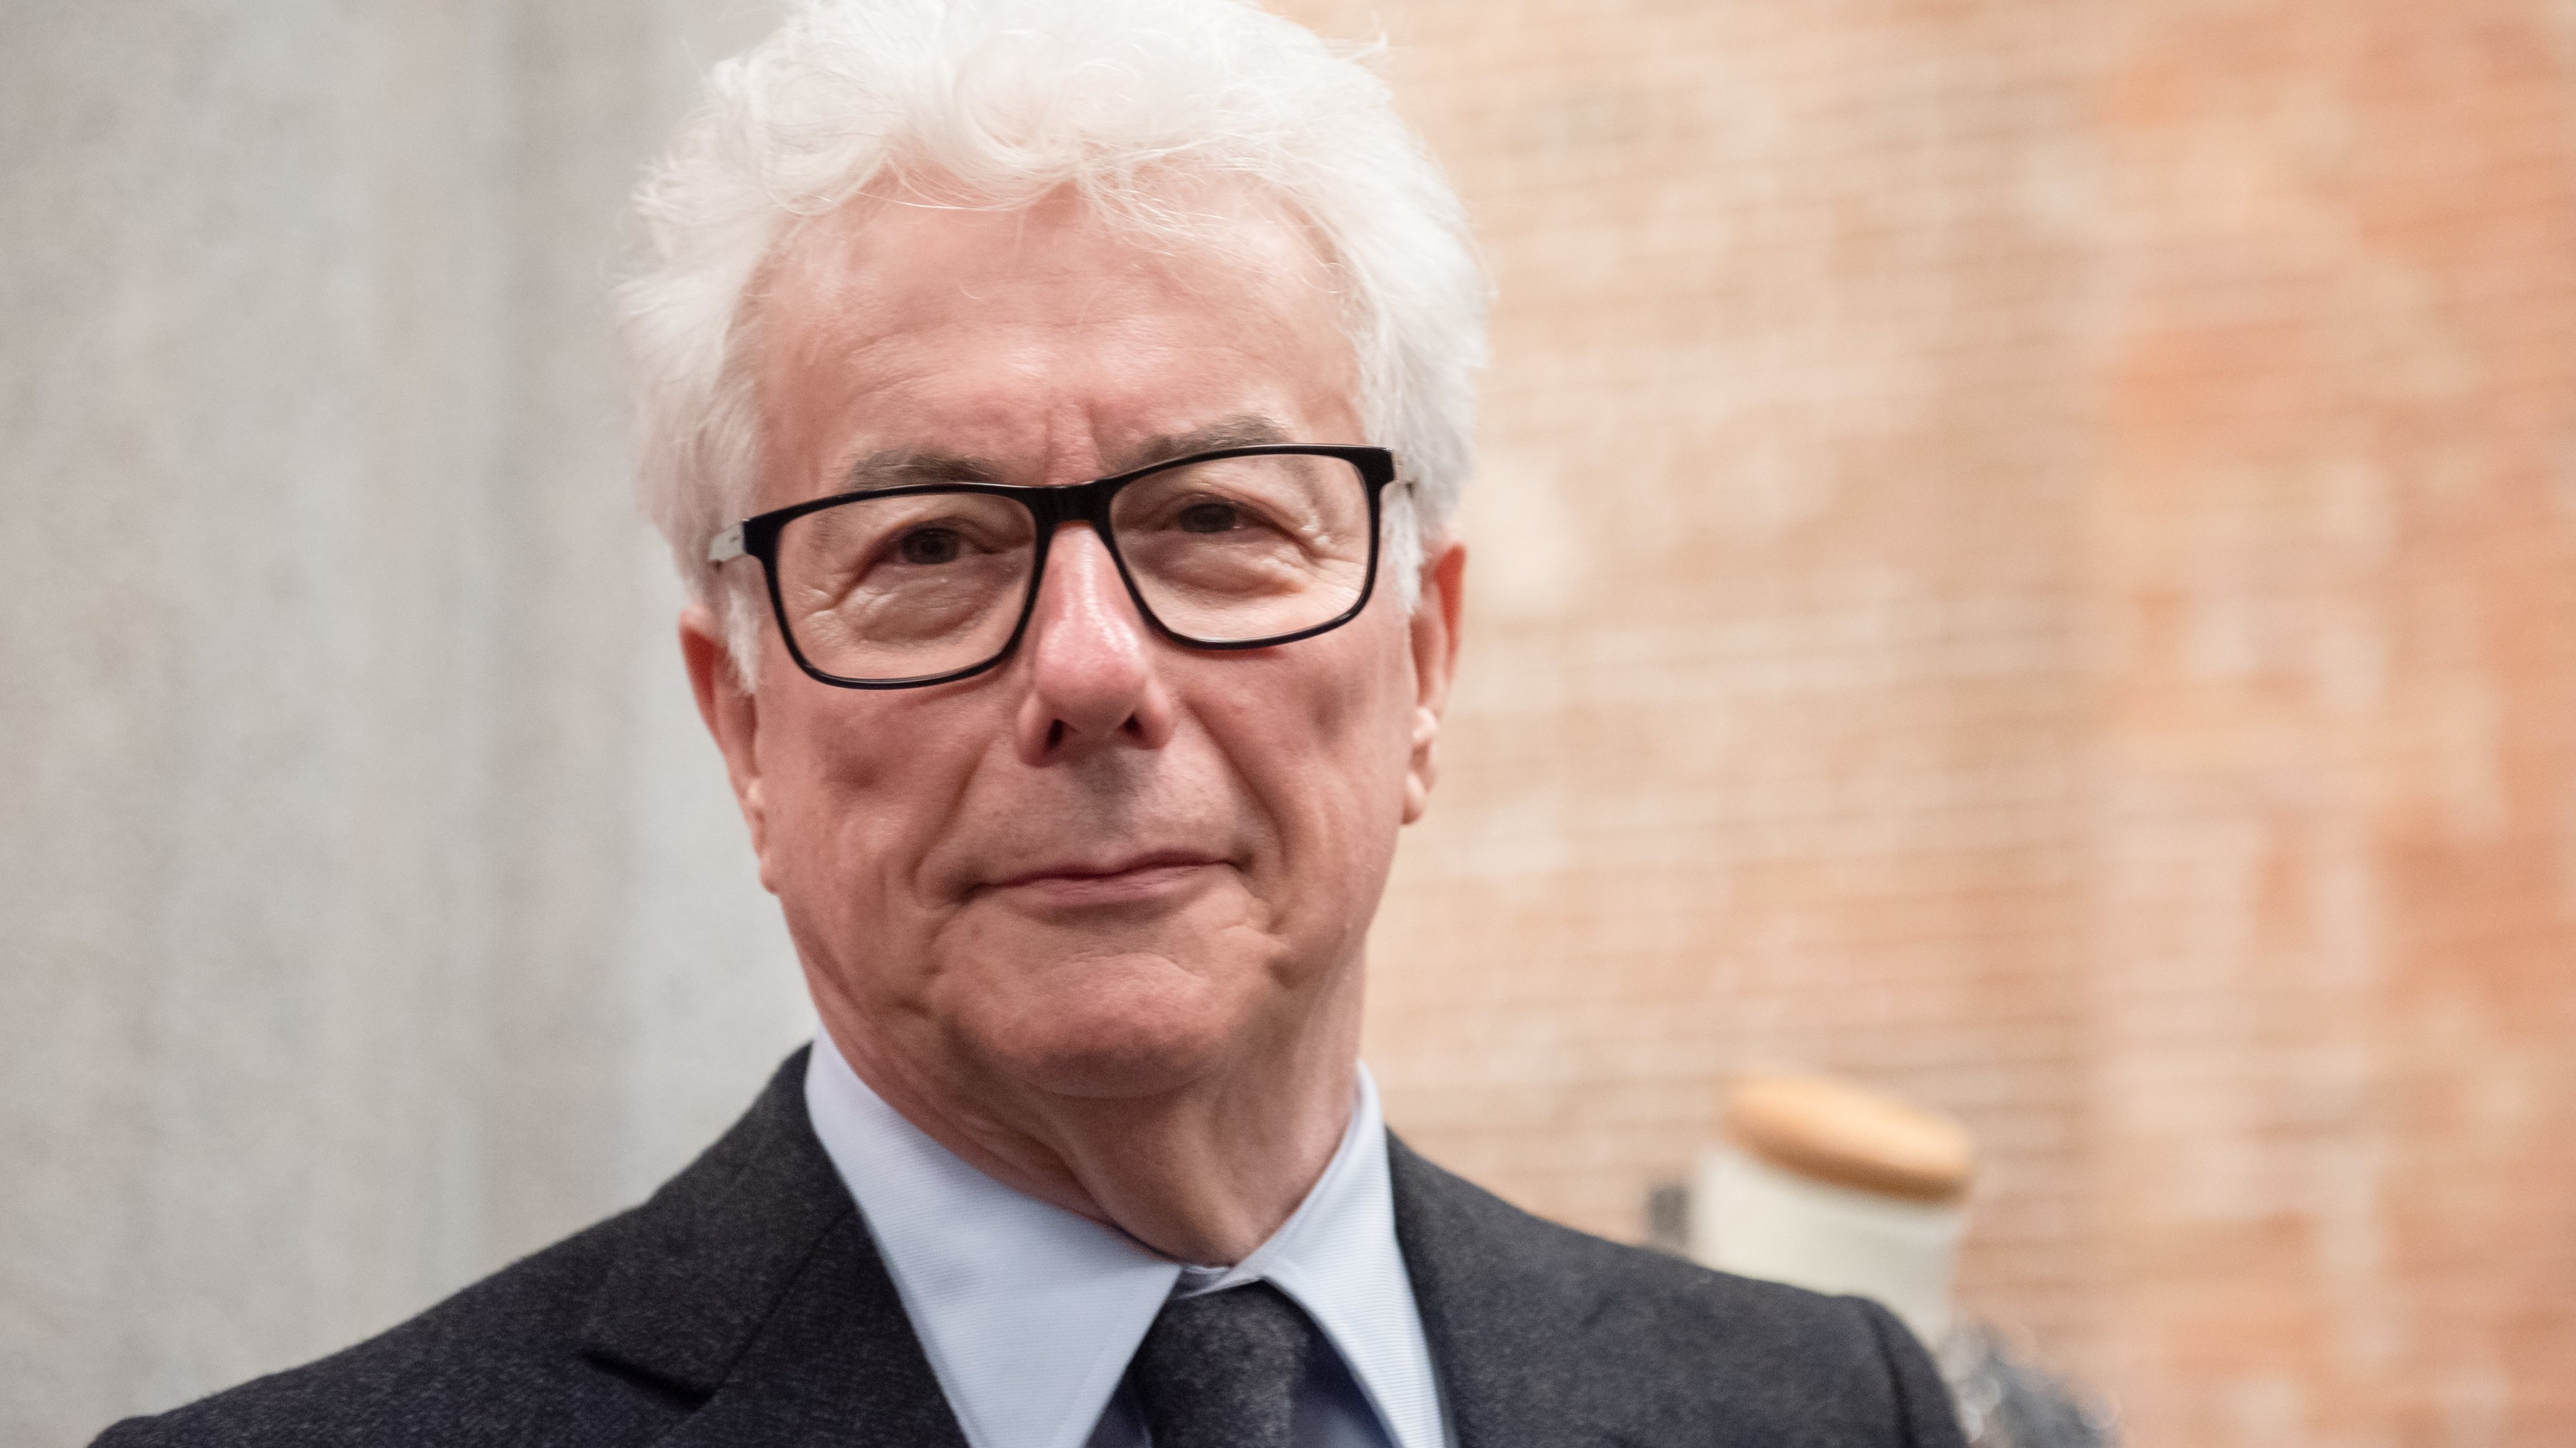 Ken Follett Attends The Final Lecture Of &#039;The Pillars of the Earth&#039; In Madrid